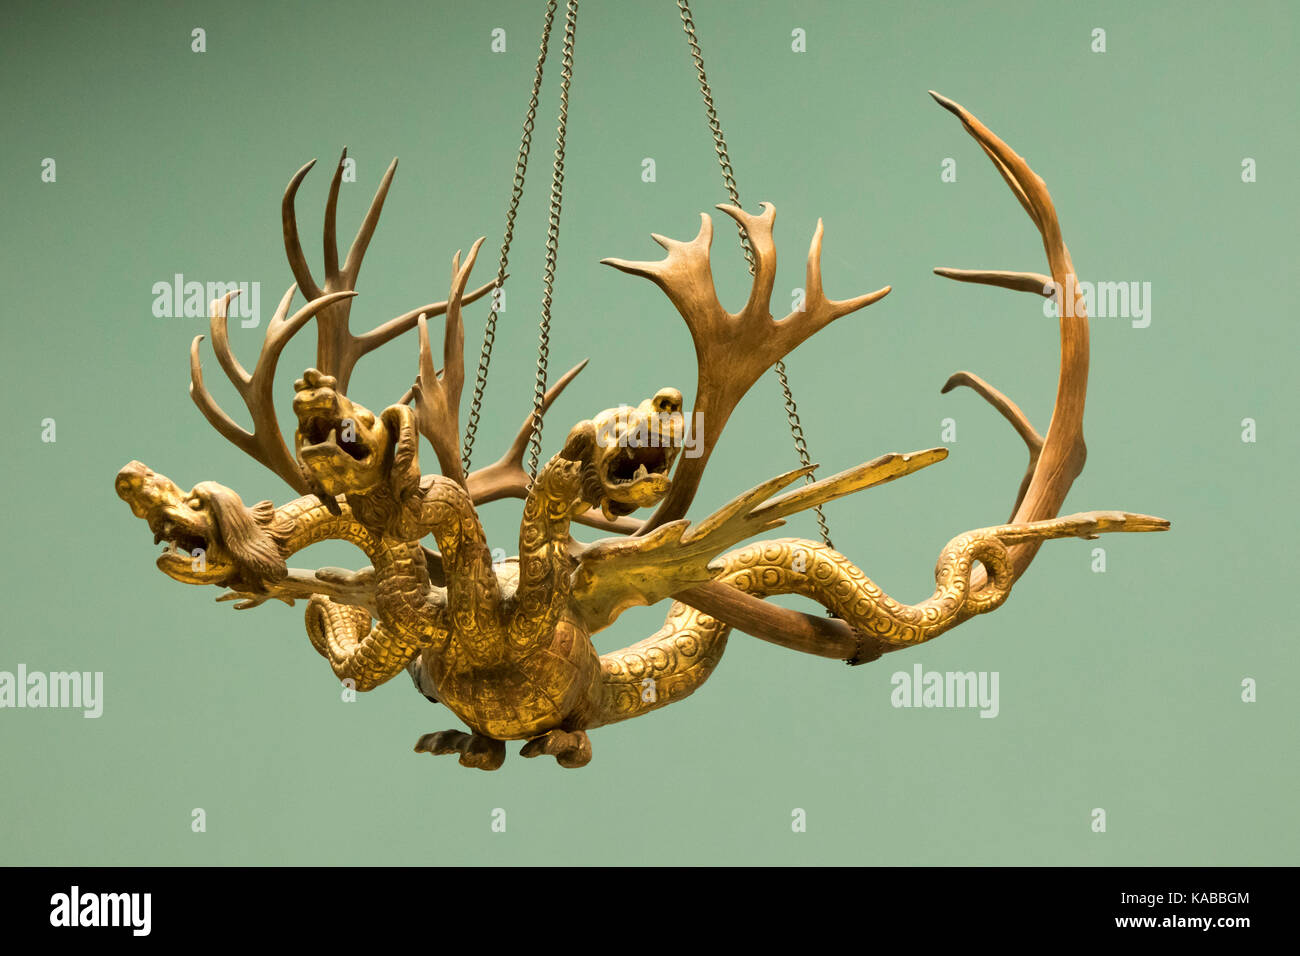 Antler chandelier (1522) in the shape of a dragon by Veit Stoss after a drawing by Durer, German National Museum, Nuremberg, Bavaria, Germany Stock Photo